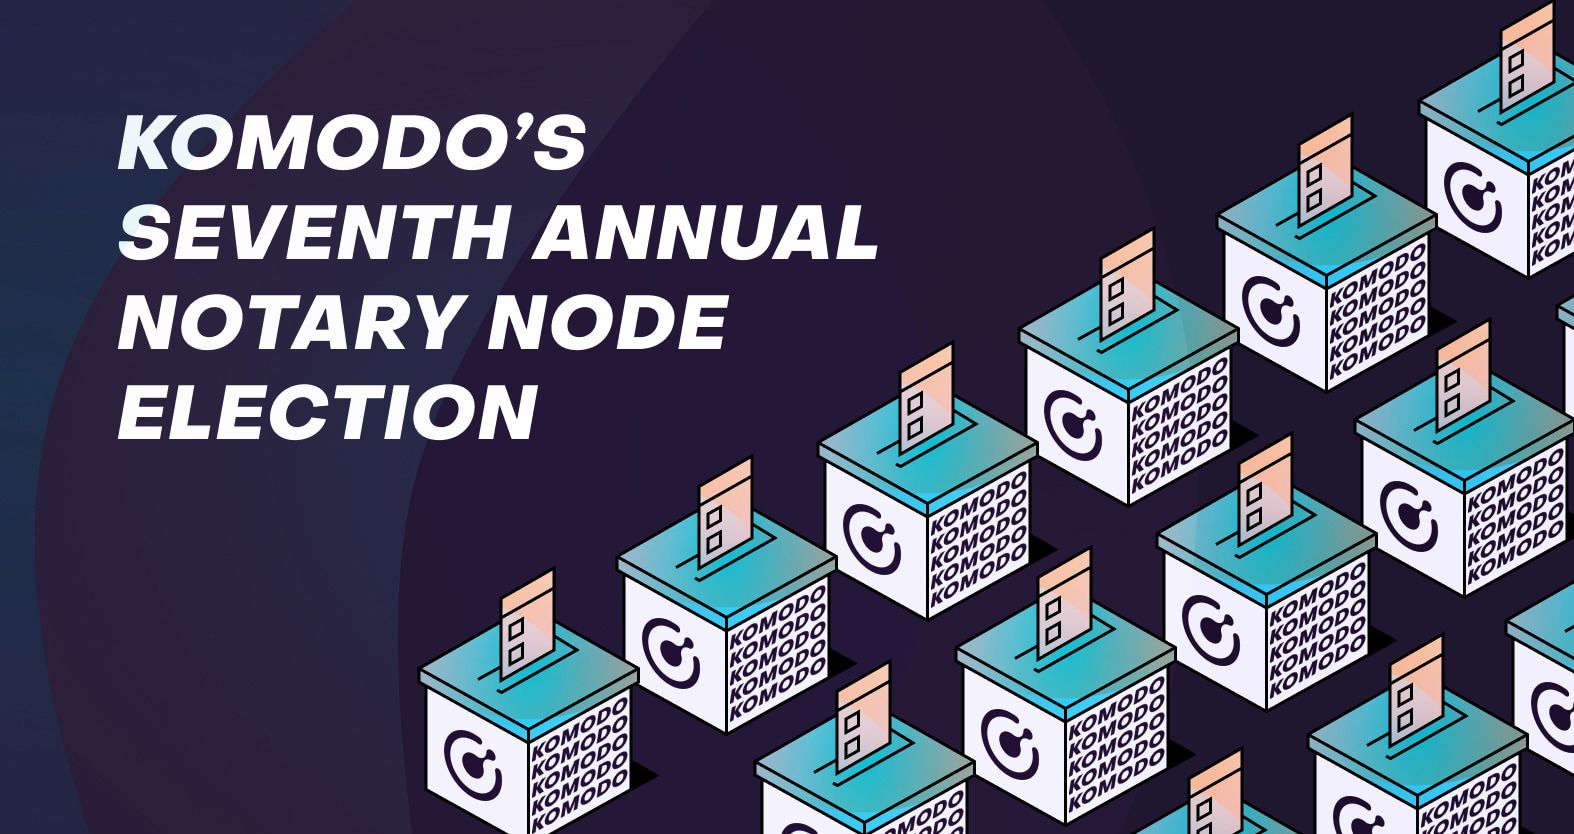 Komodo's 7th annual notary node election